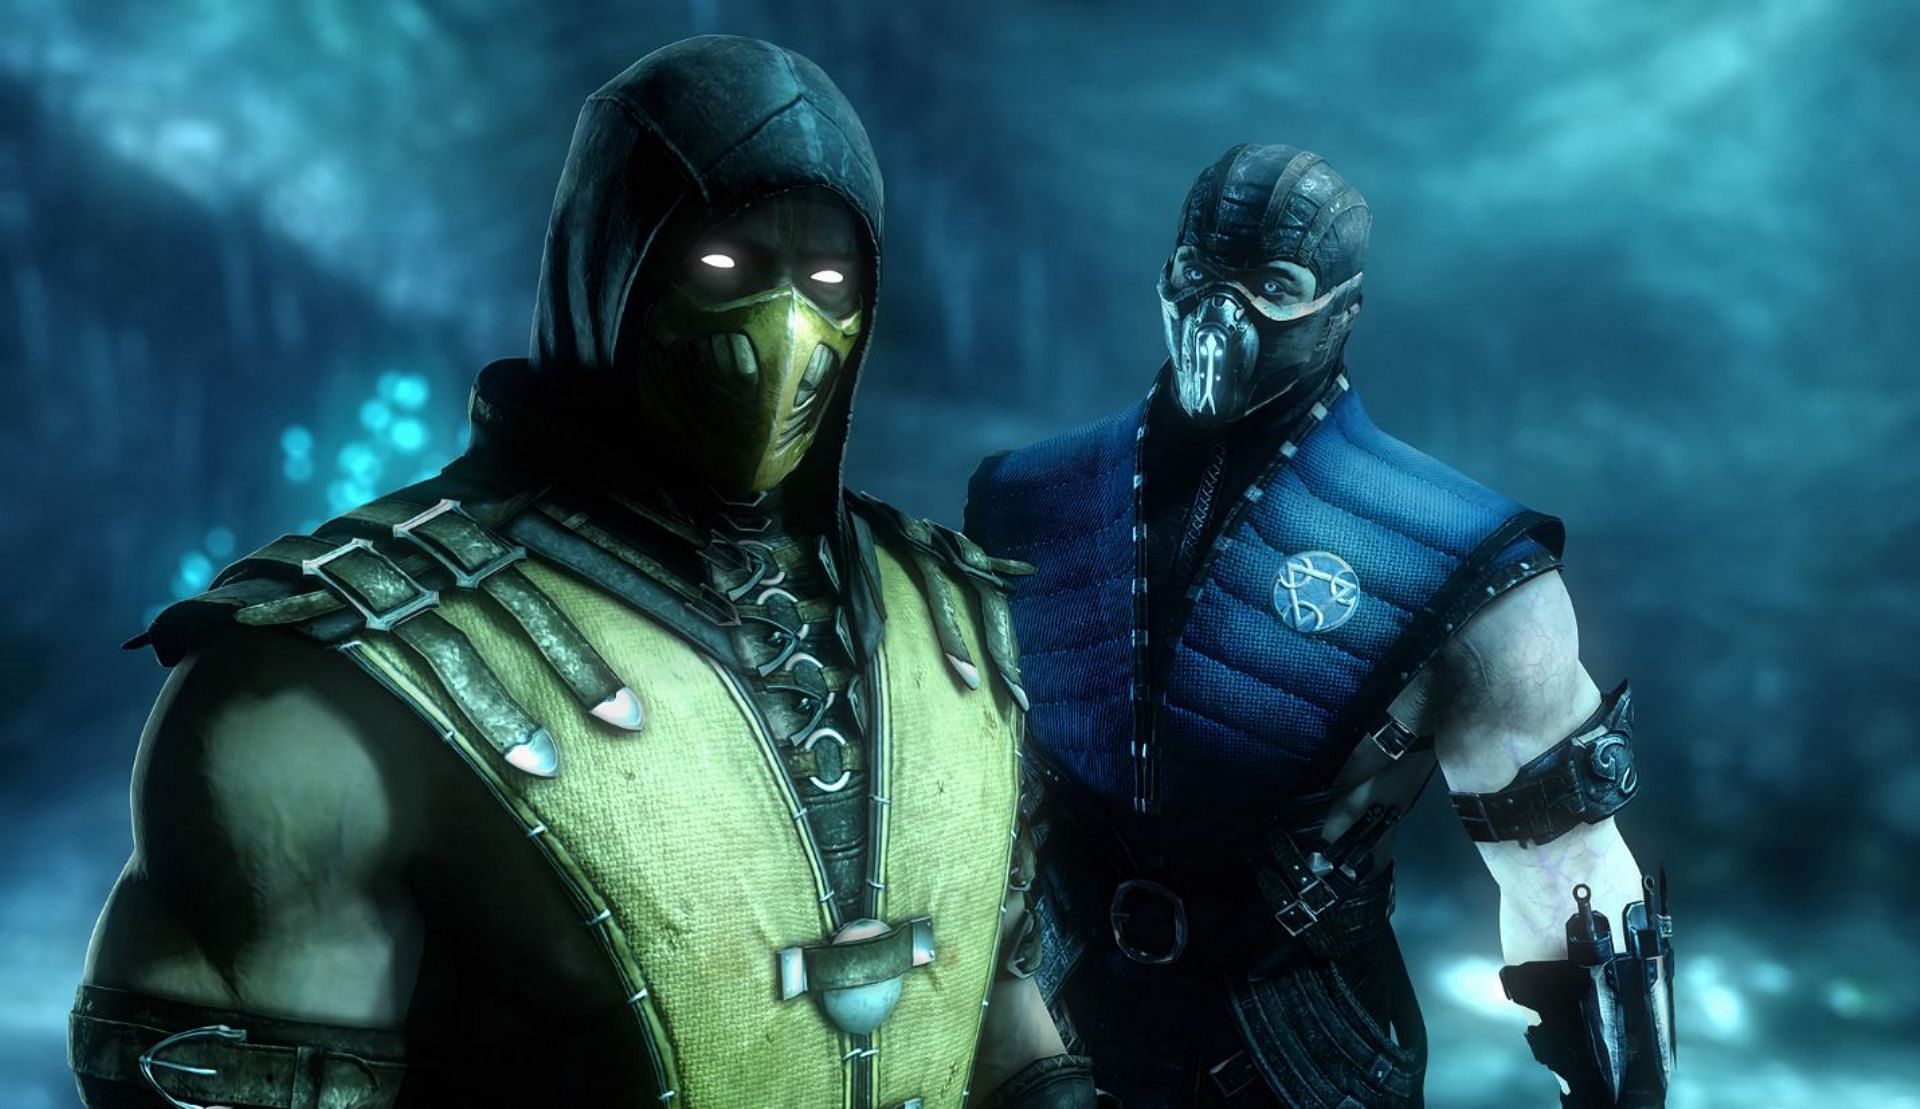 Find out about some of the best Mortal Kombat-themed mods in GTA 5 (Image via gta5-mods.com)